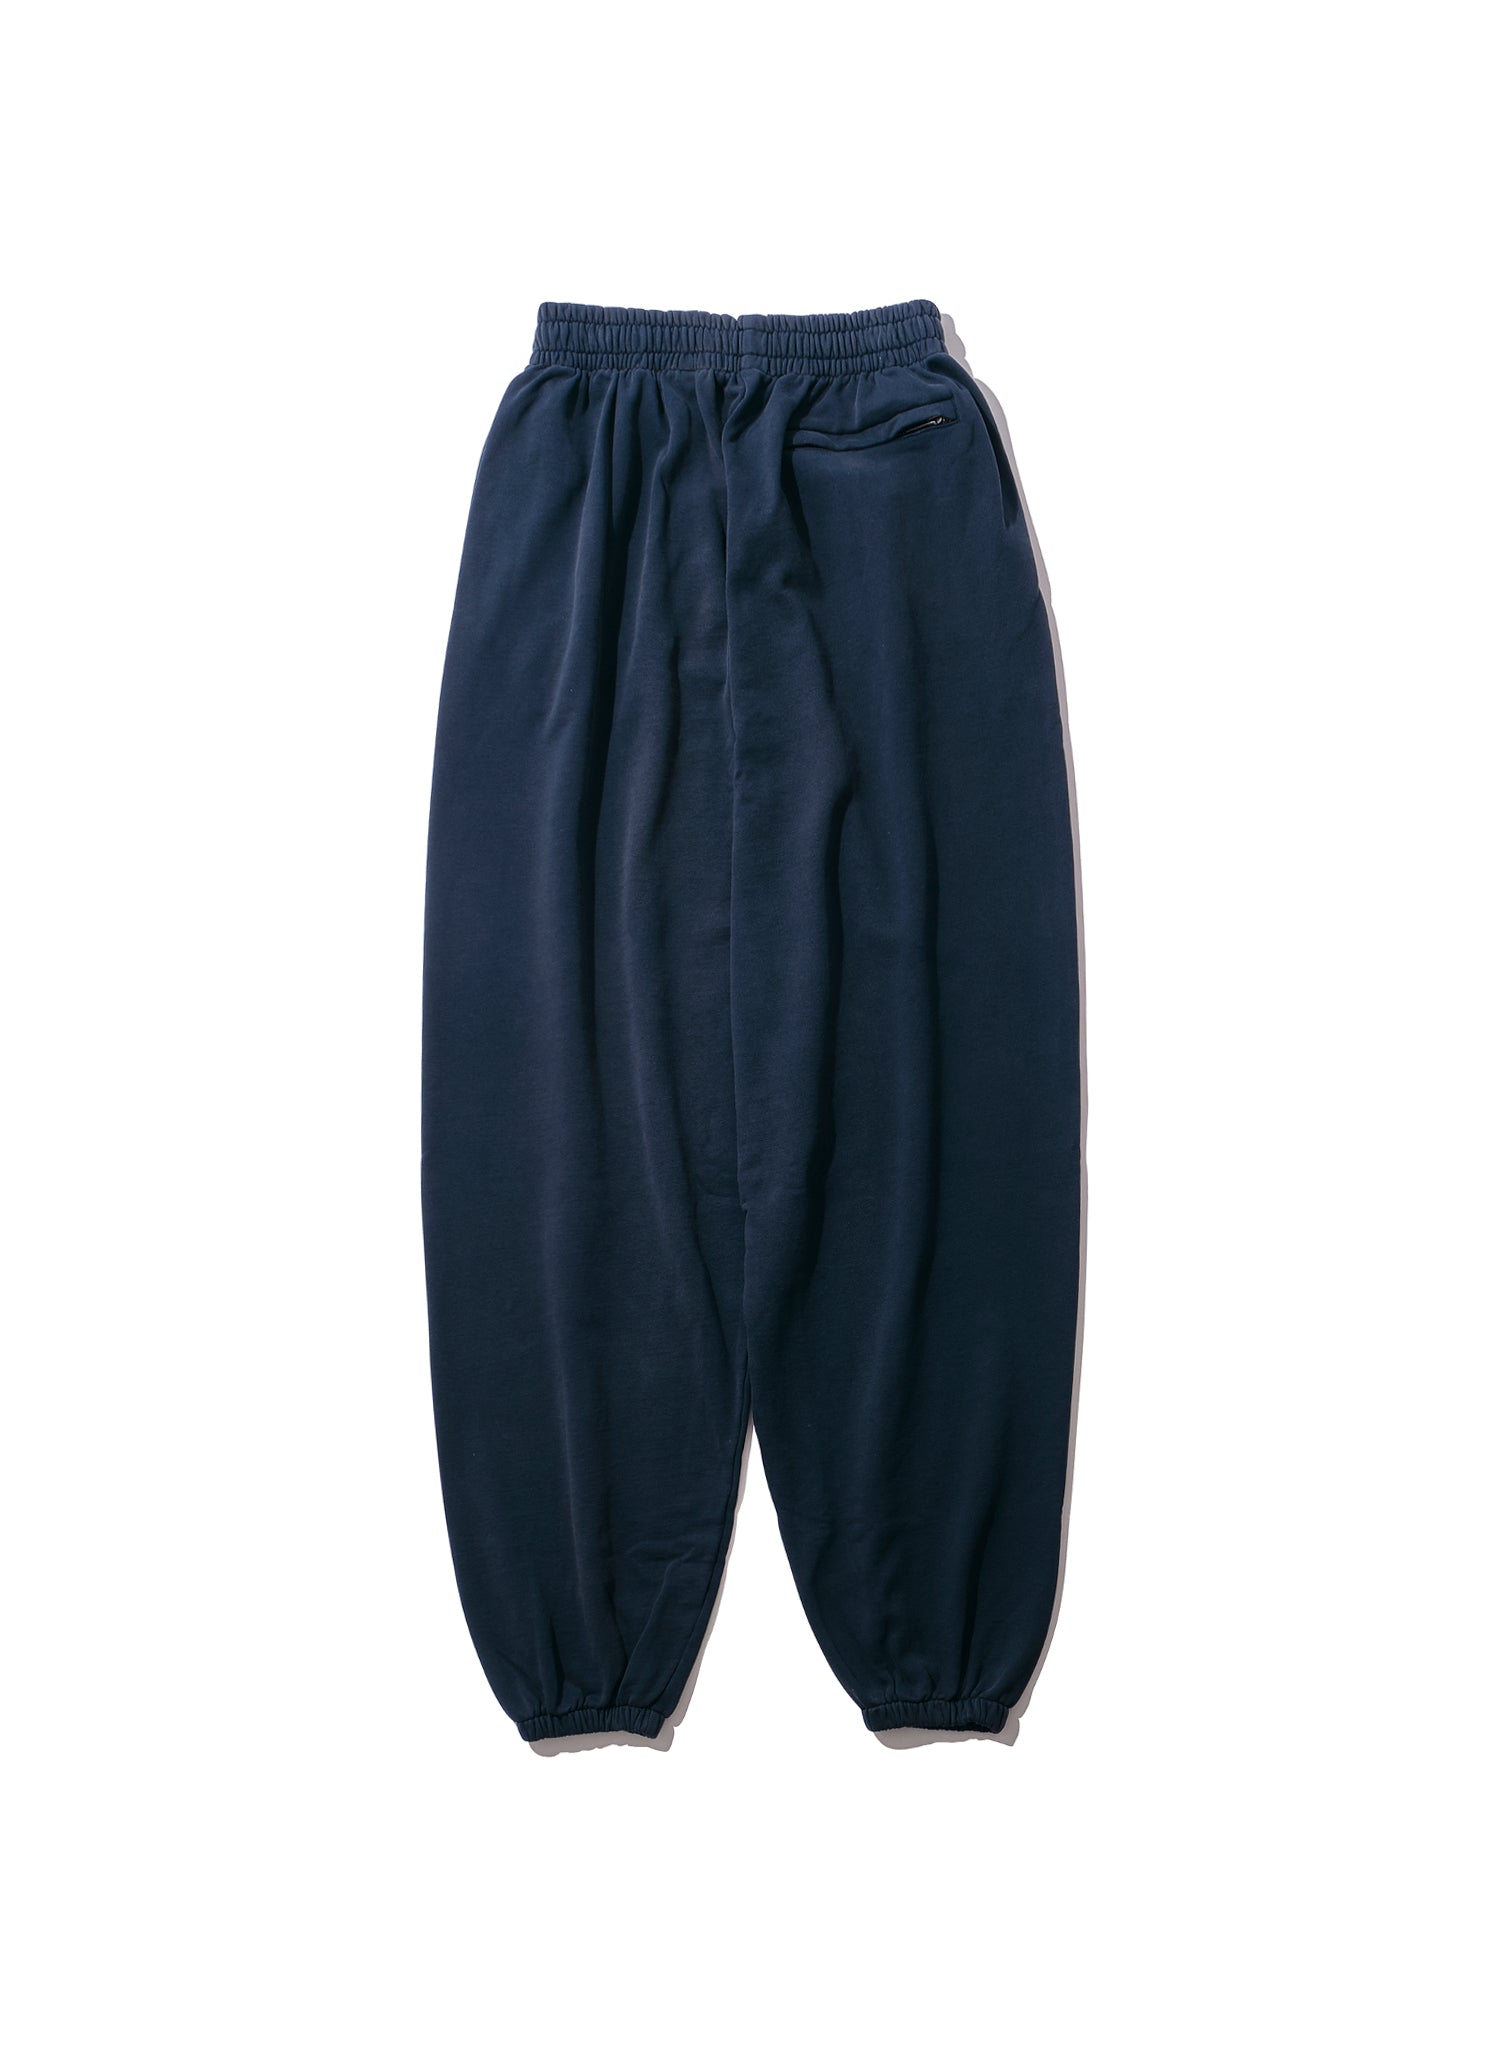 WILLY CHAVARRIA / BASIC SWEAT PANTS BLUE MOOD